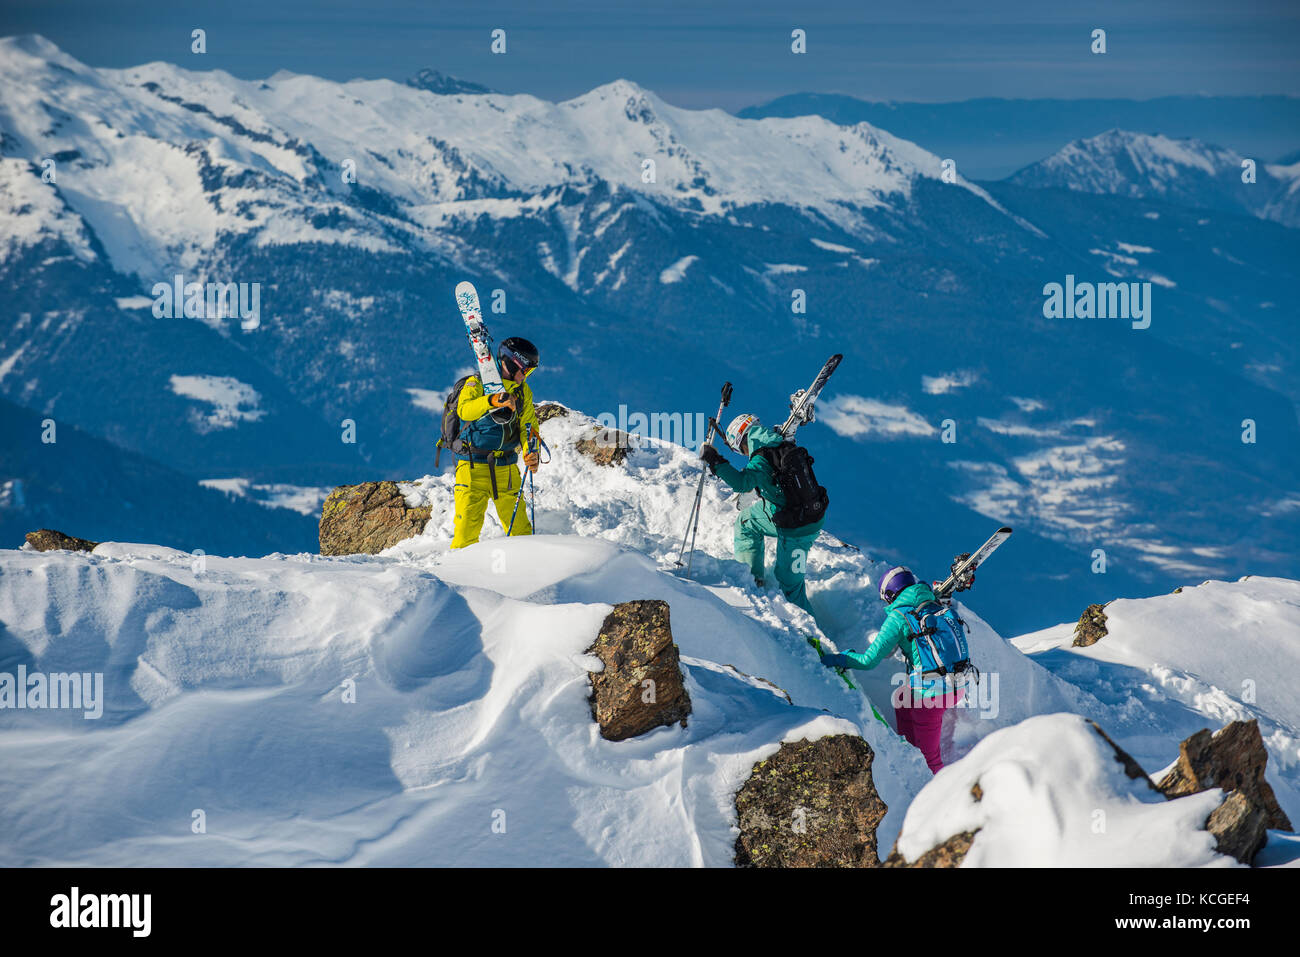 A ski instructor guides two women off piste in the French ski resort of Courchevel. Stock Photo